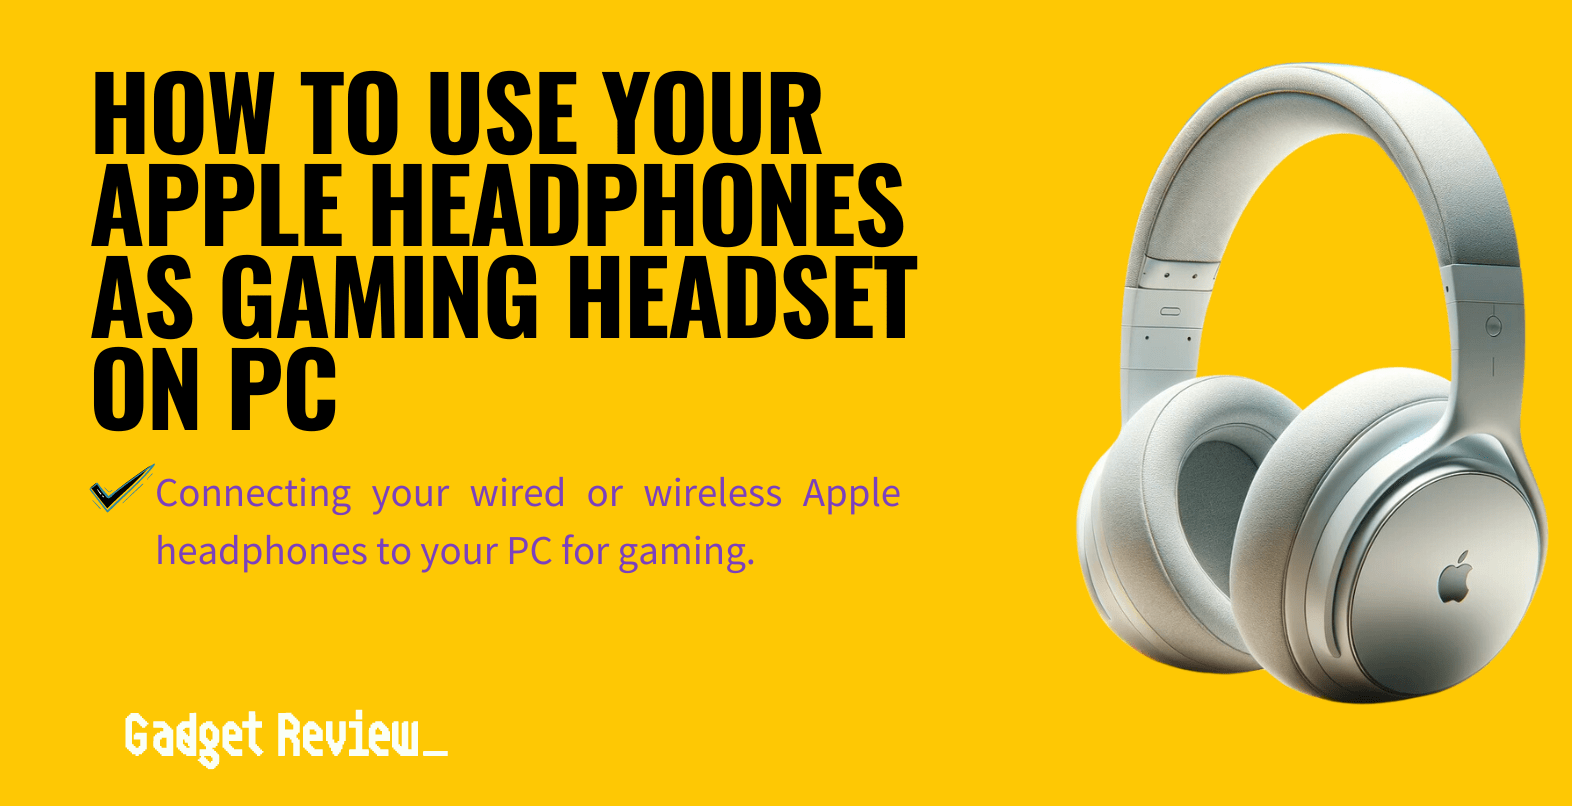 How to Use Your Apple Headphones as a Gaming Headset on Your PC